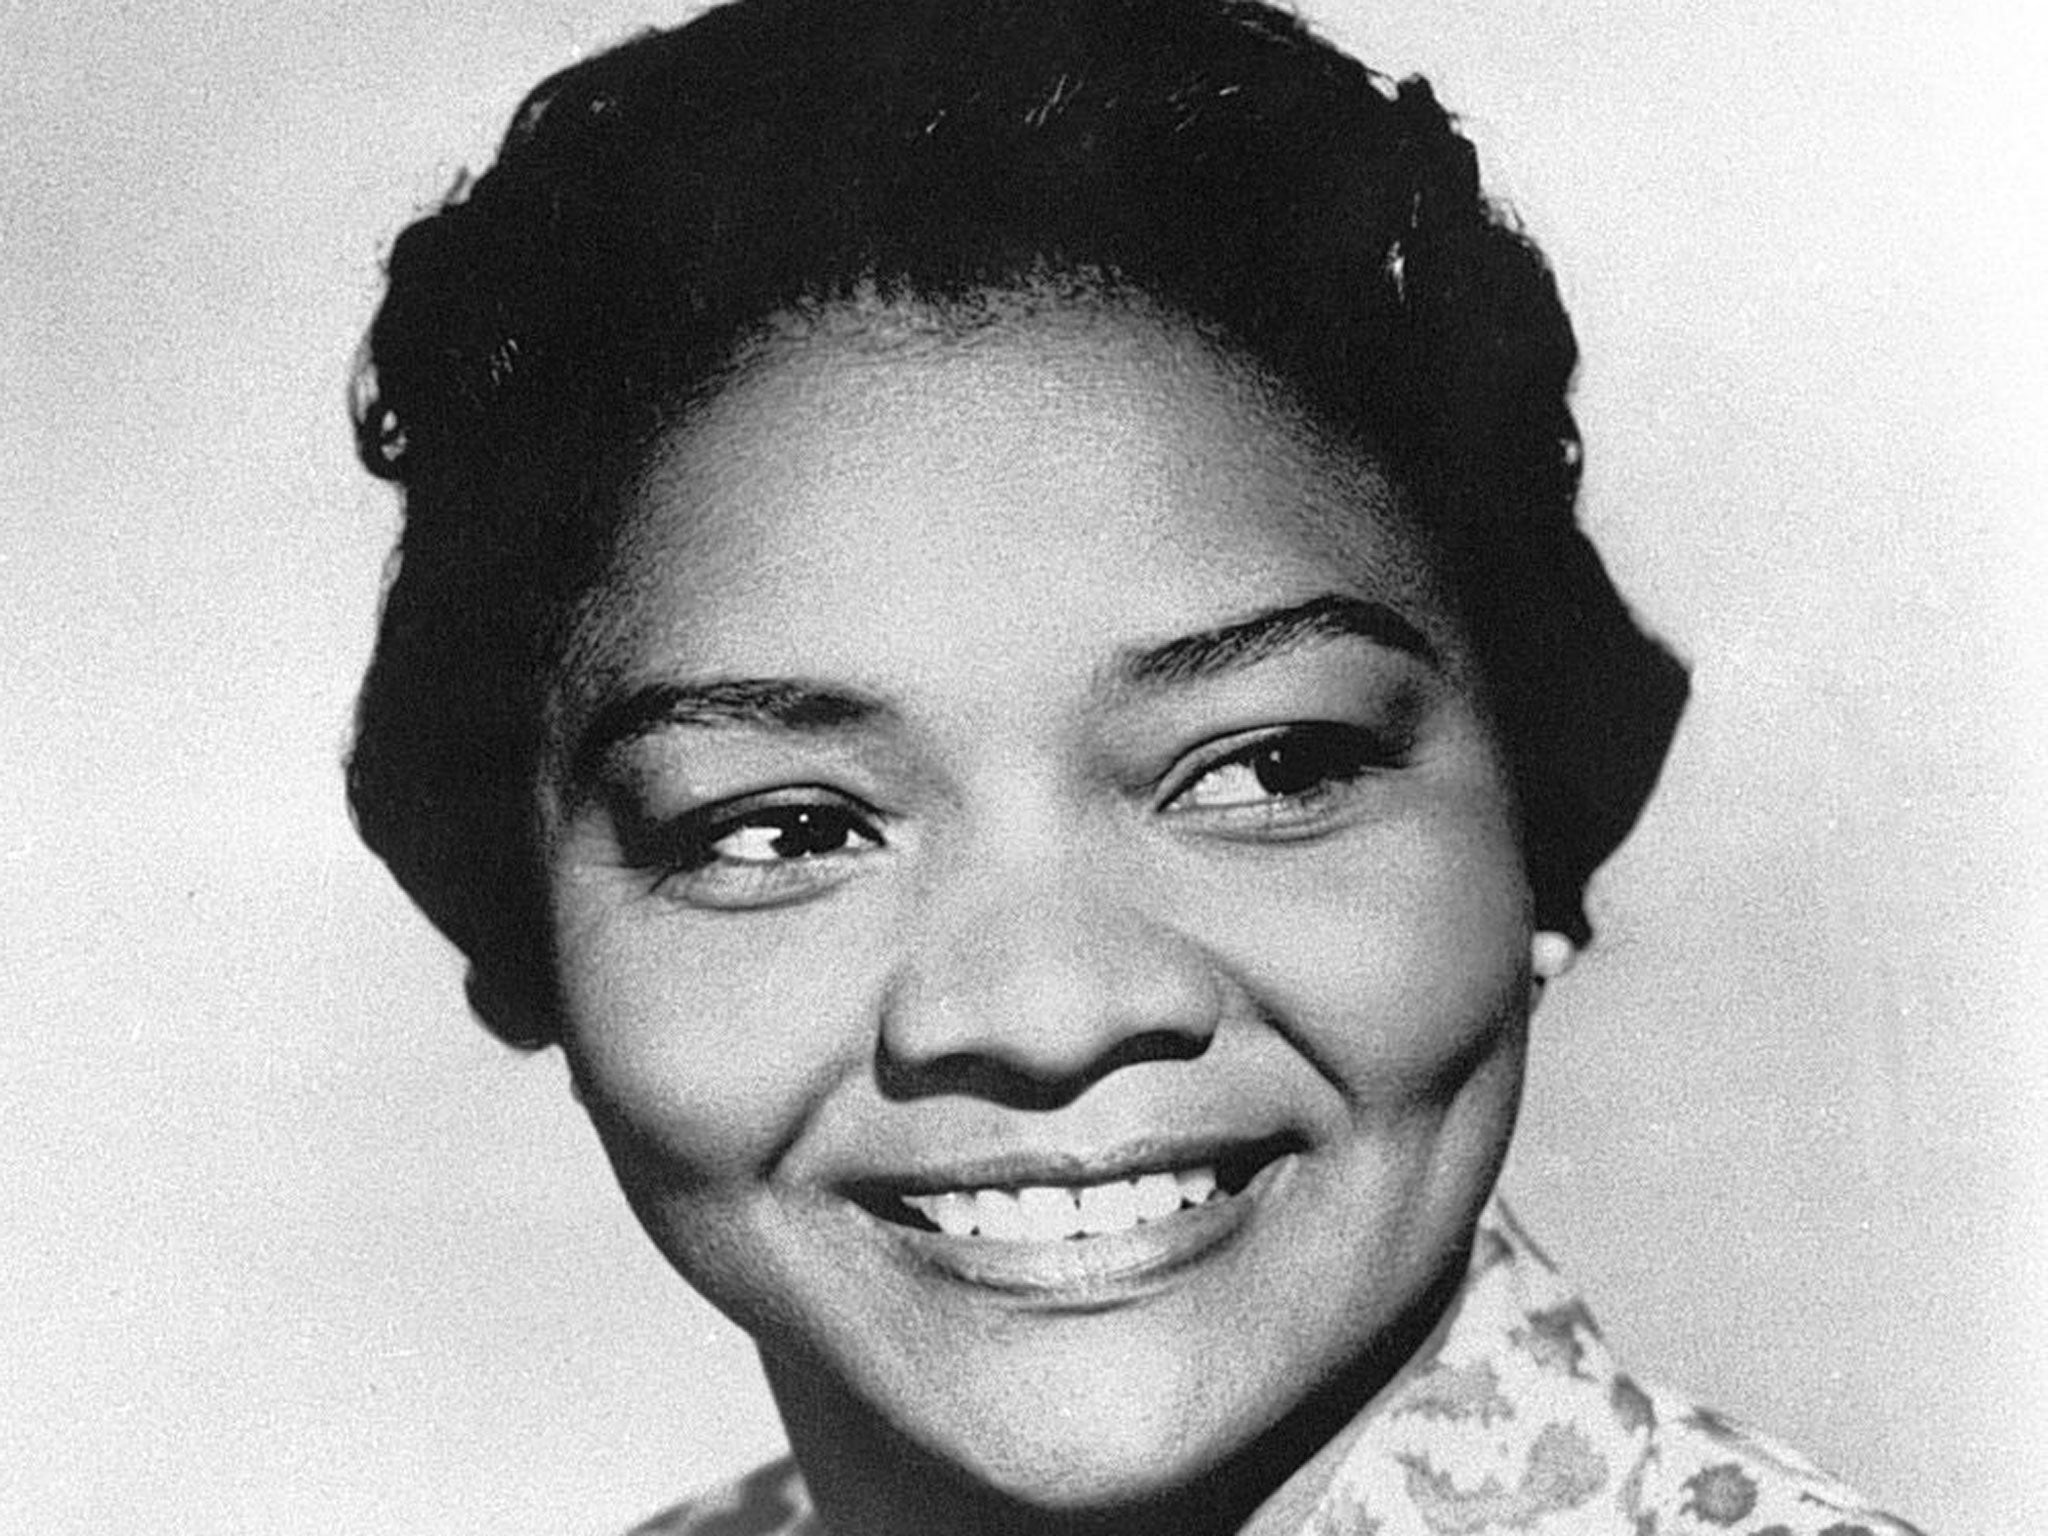 Moore in 1961: a few years later she would find roles in the era of blaxploitation